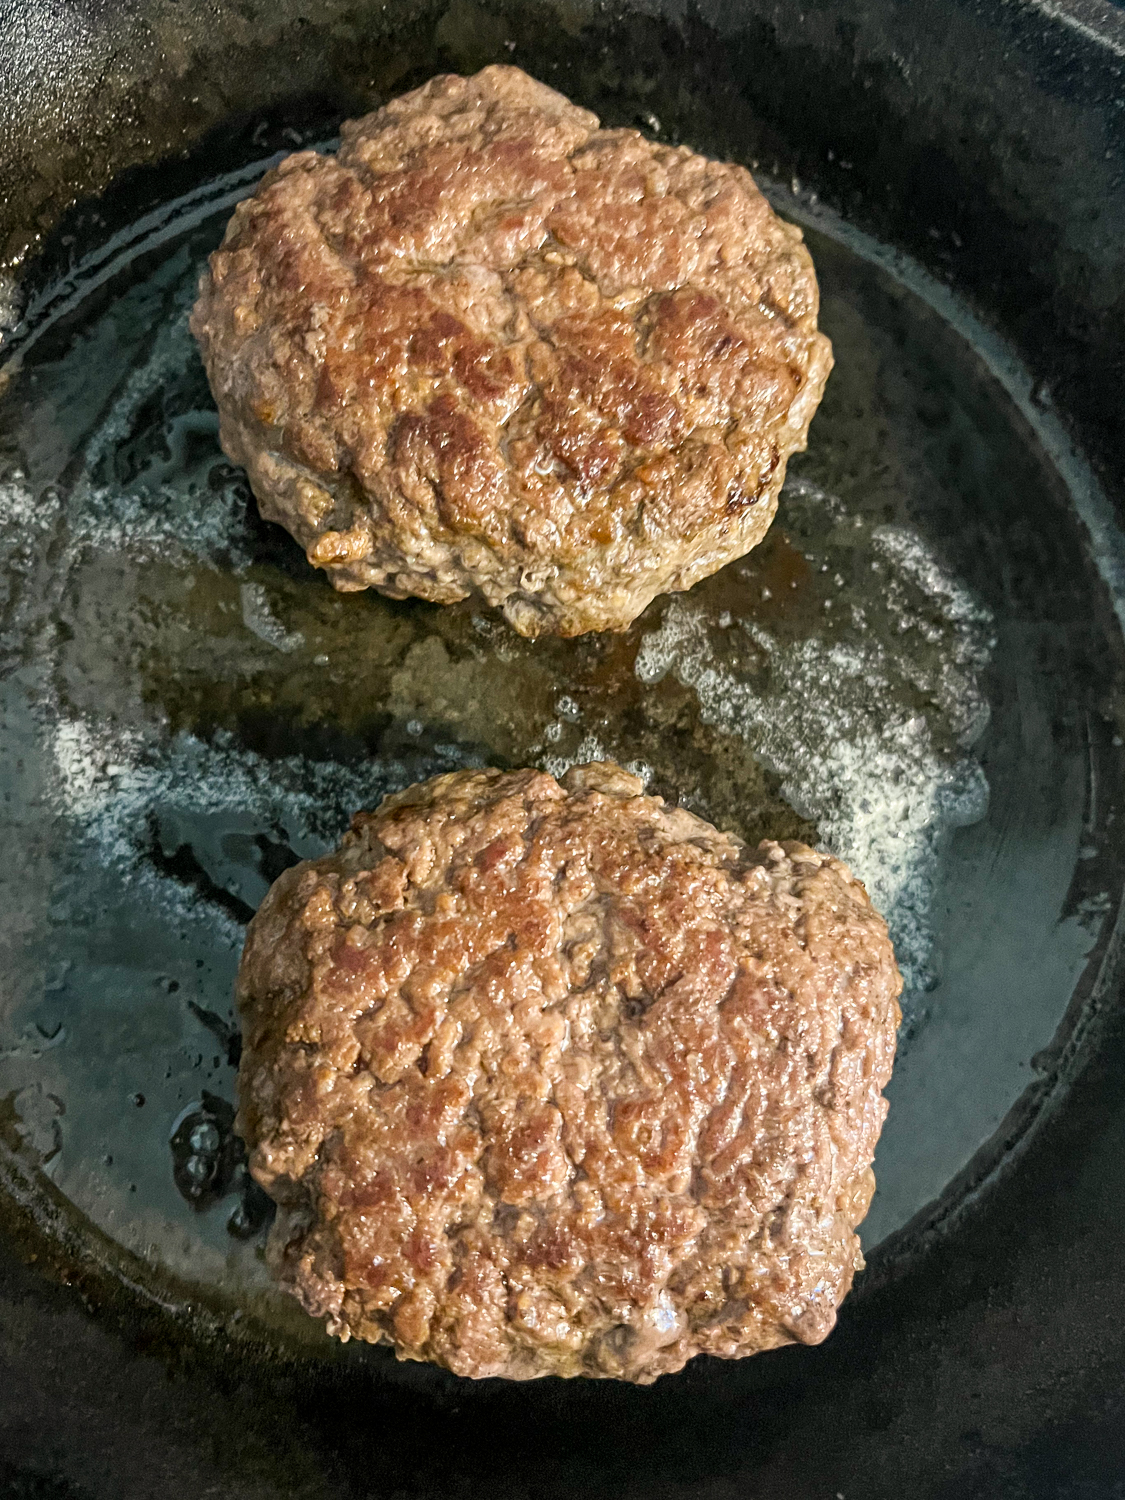 Two half pound burgers cooking in a cast iron skillet.